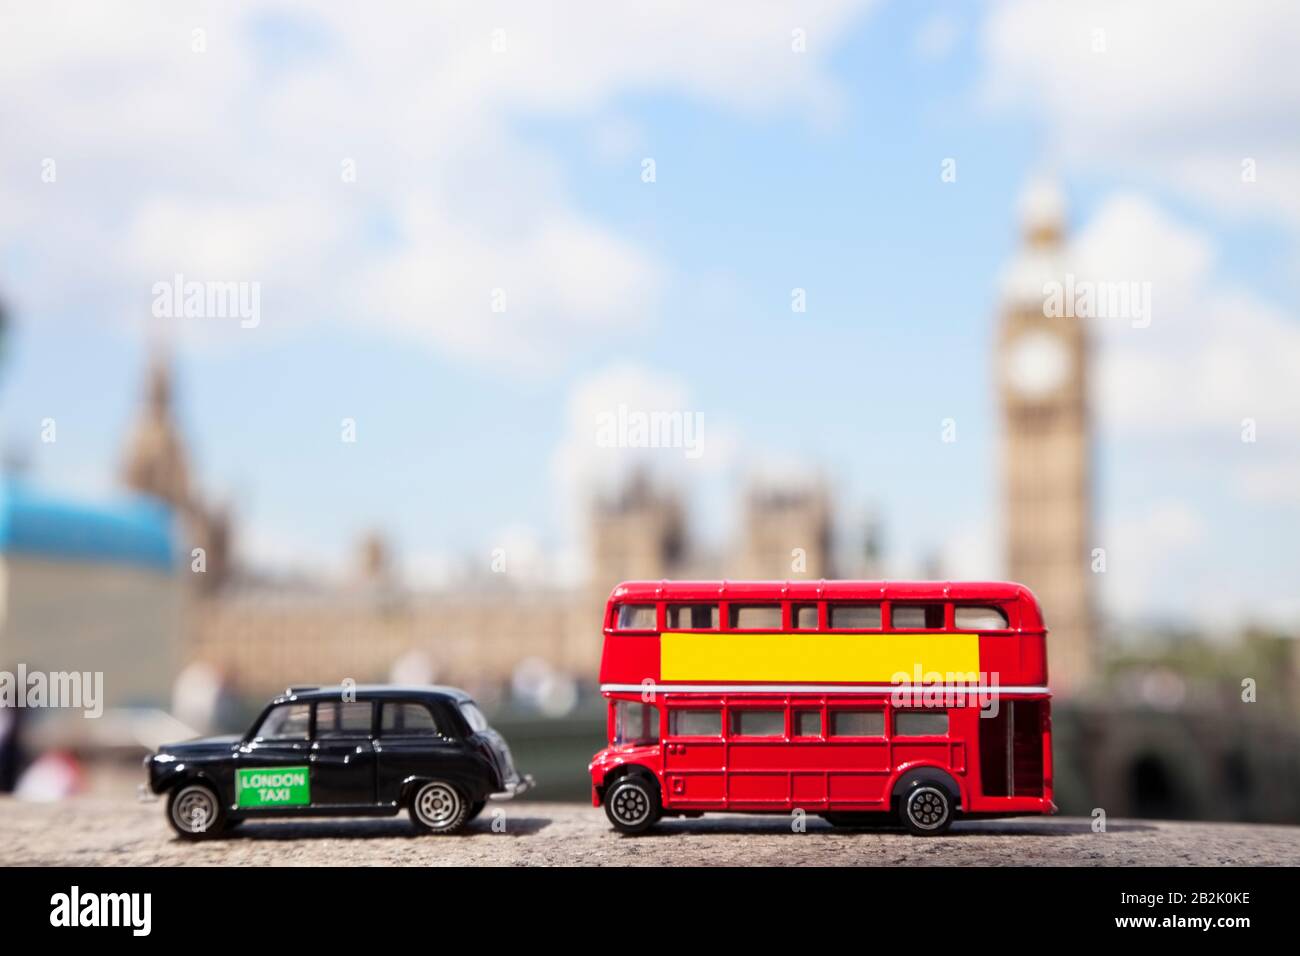 Public transport figurines with Big Ben Tower in the background Stock Photo